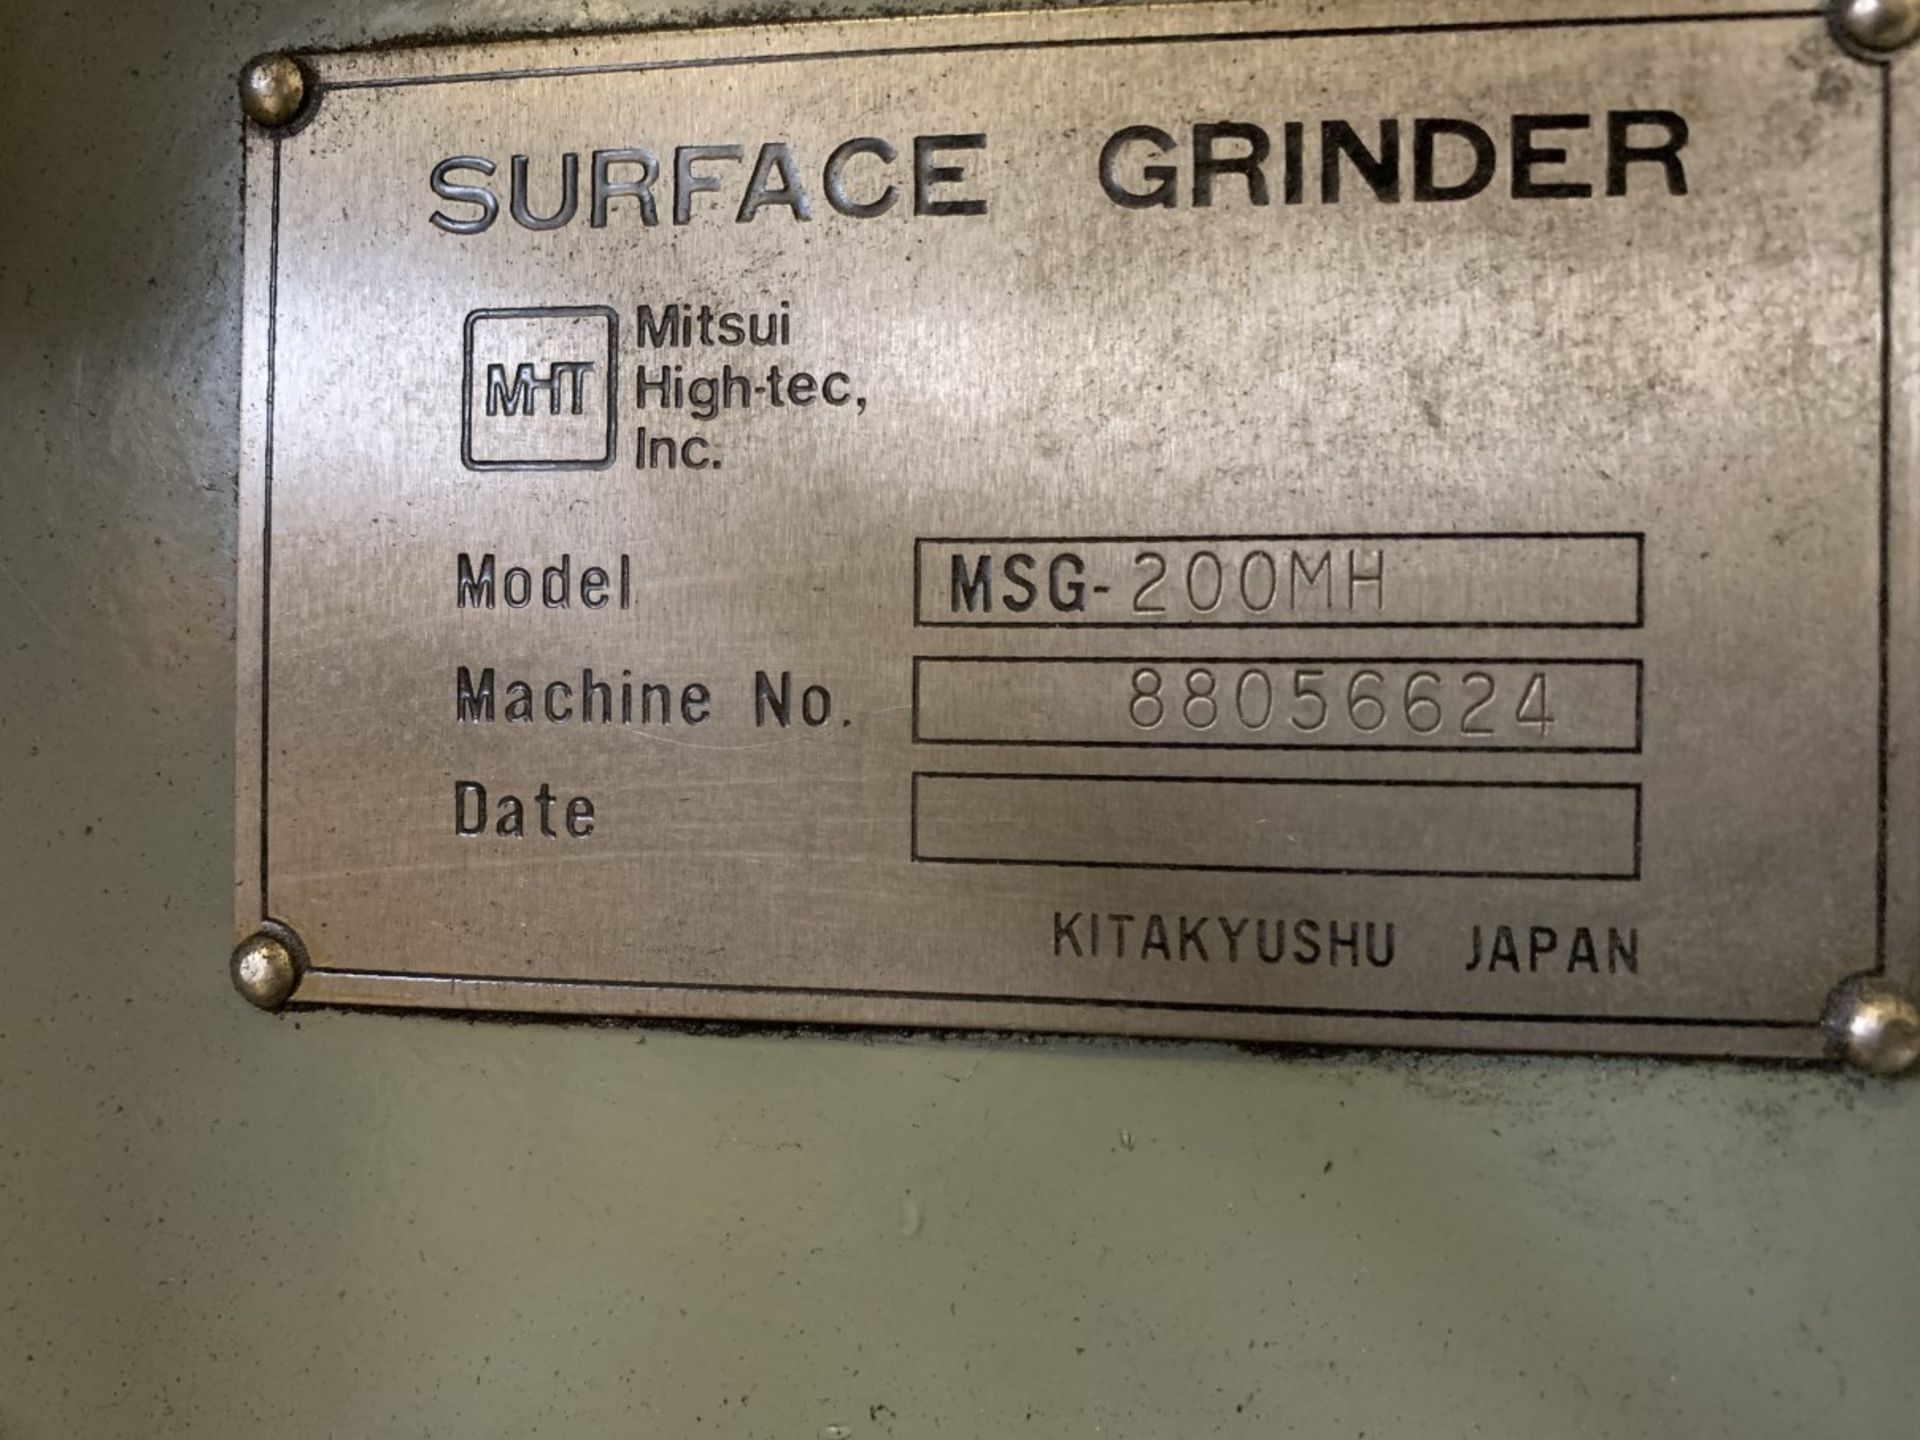 MITSUI HIGH-TEC MSG-200MH Surface Grinder, s/n 88056624, 6" x 12" Magnetic Chuck, Walker Chuck - Image 5 of 5